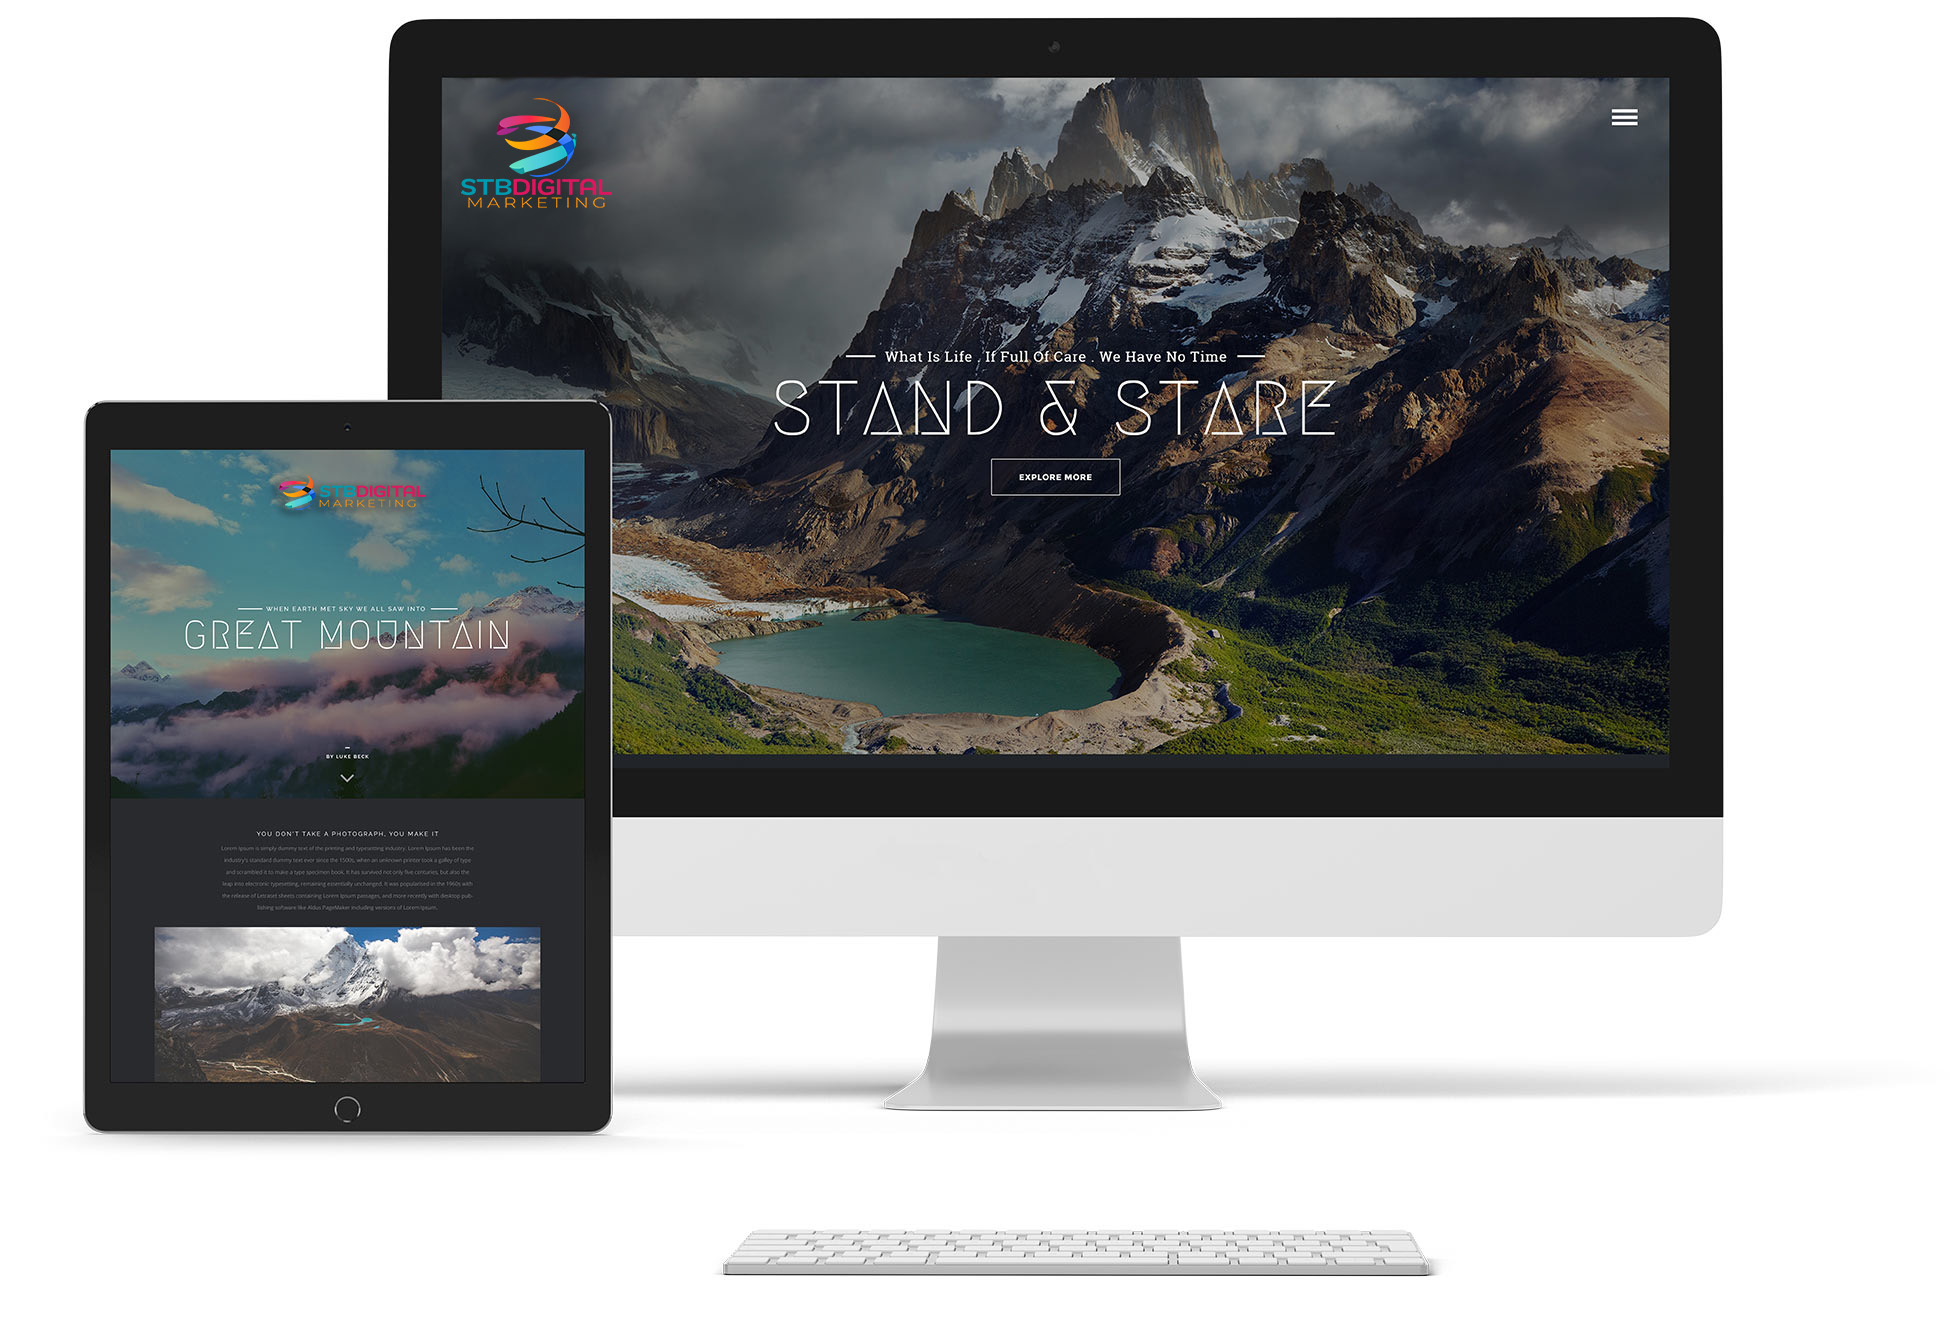 Responsive Web Design image of a desktop monitor and a mobile device standing side-by-side containing the Simply The Best Digital Marketing logo in front of a mountainous background.